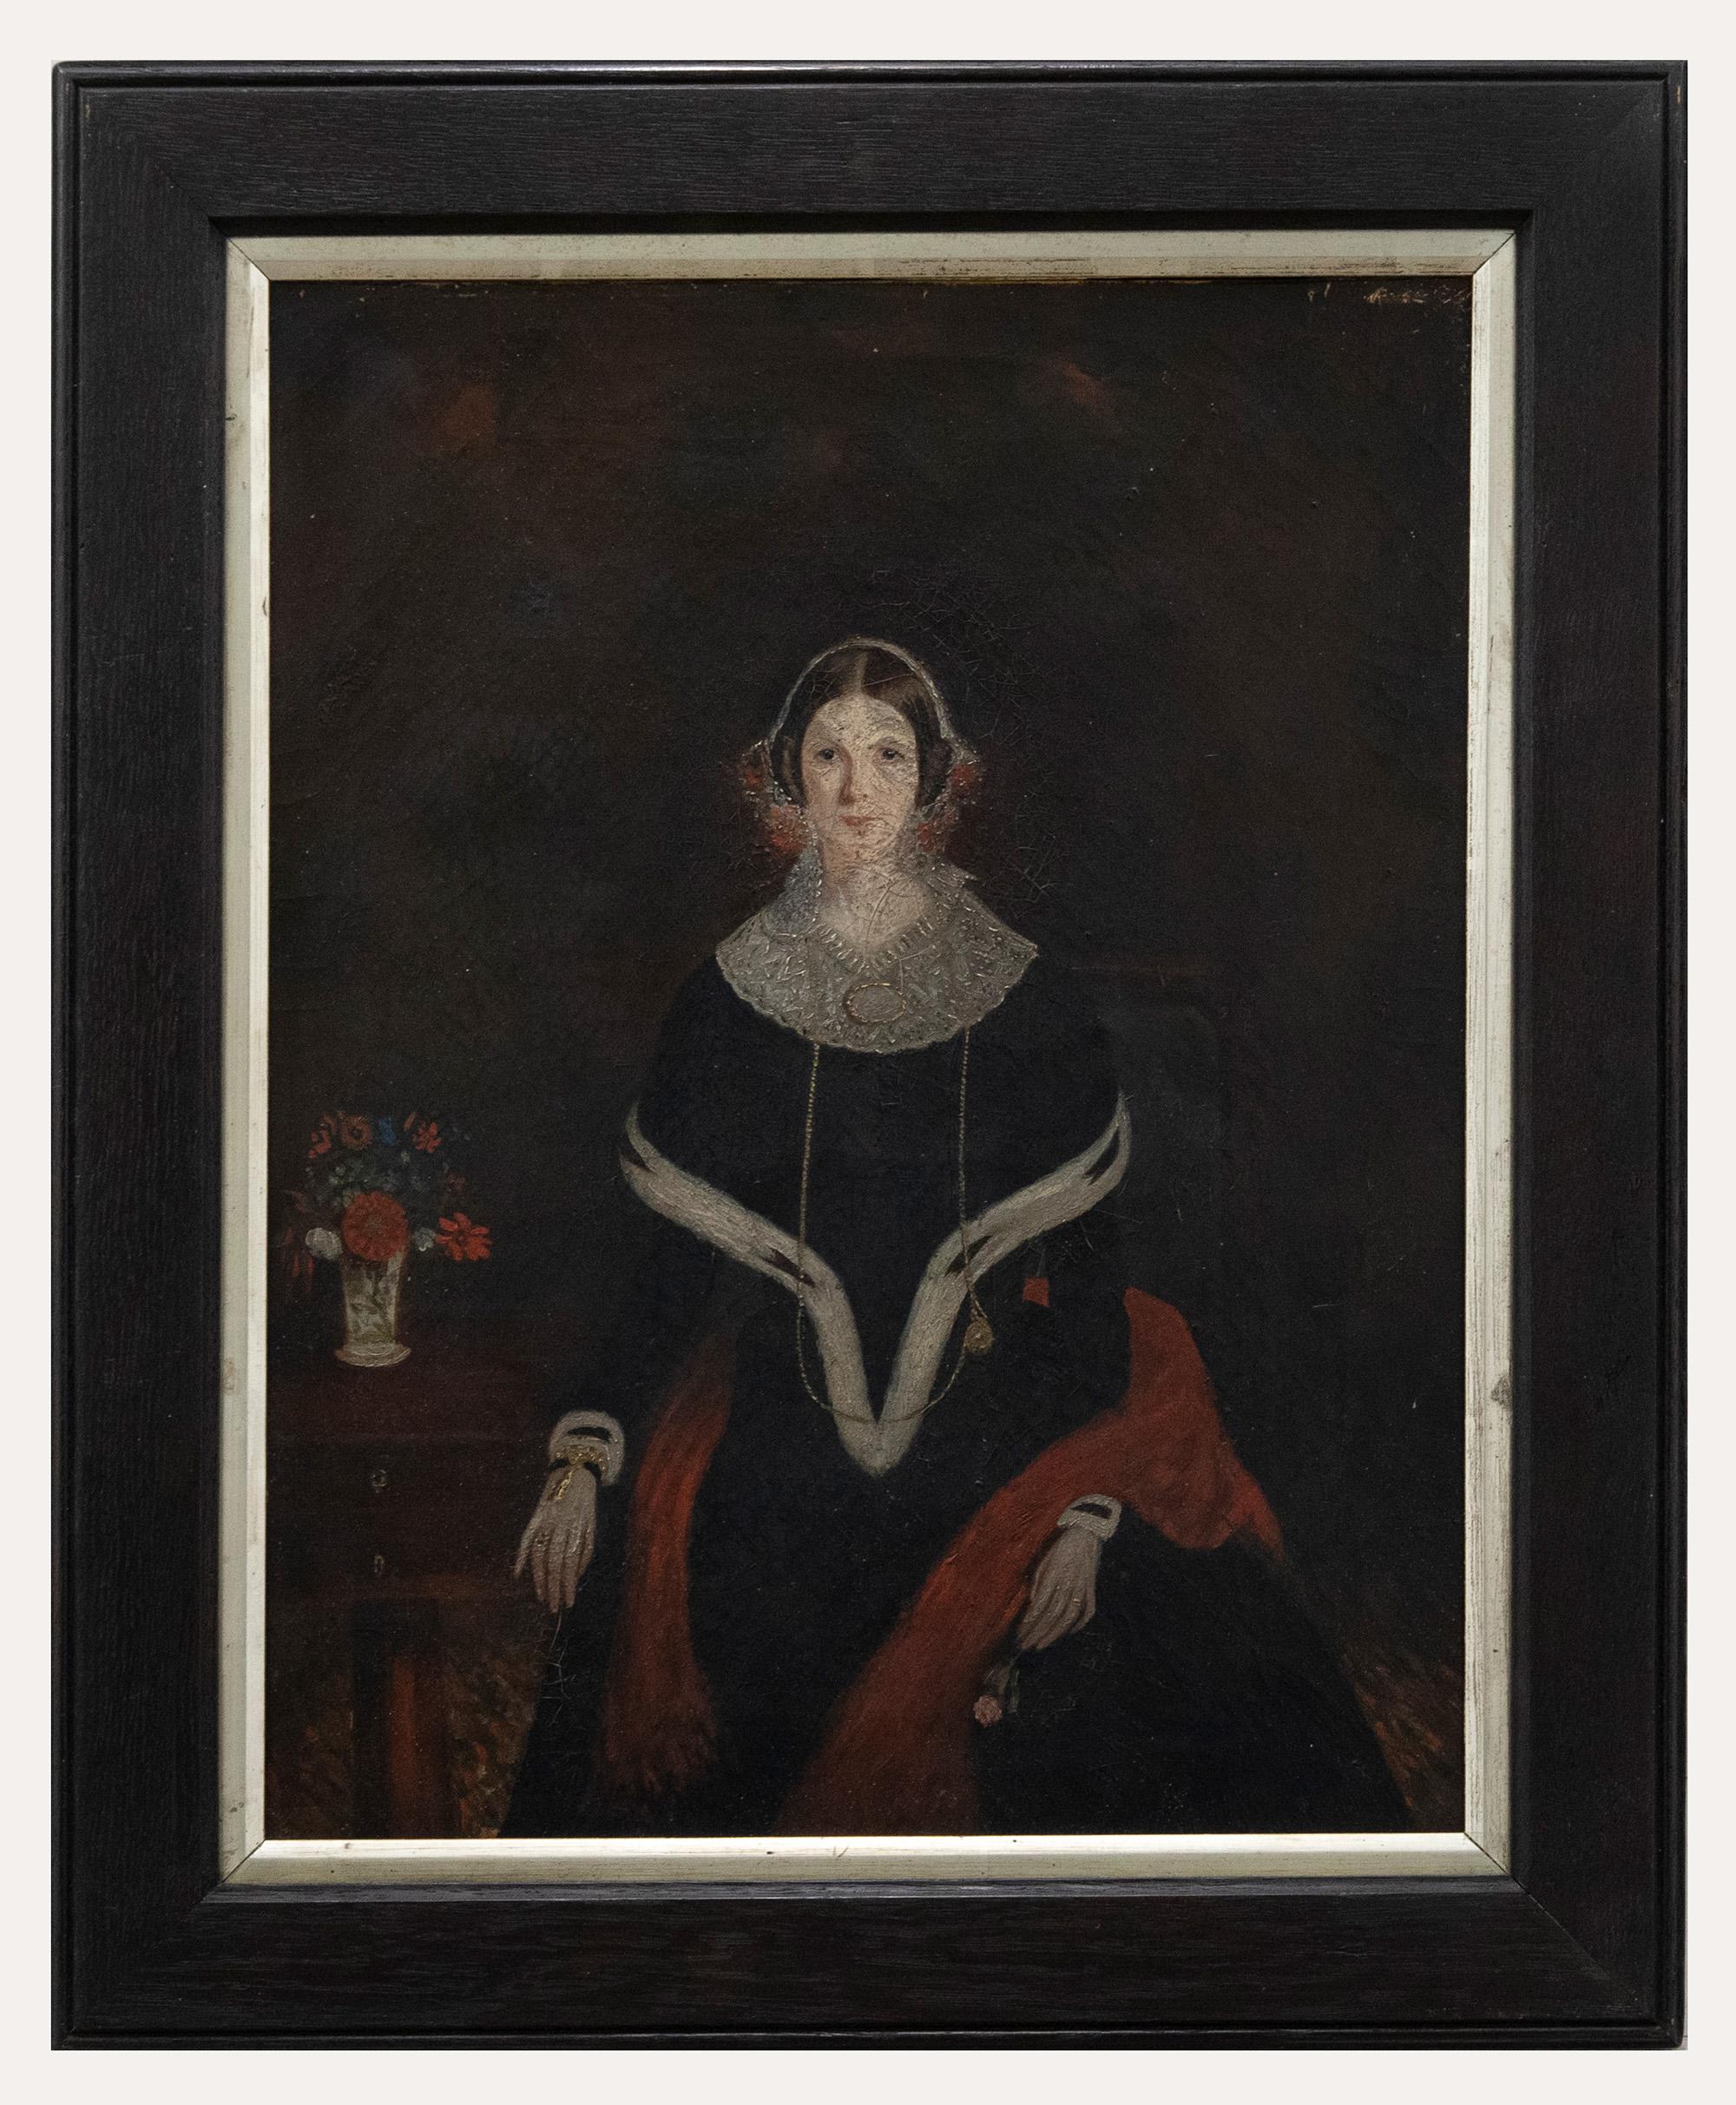 Unknown Portrait Painting - Victorian School Mid 19th Century Oil - Lady in Half-Mourning